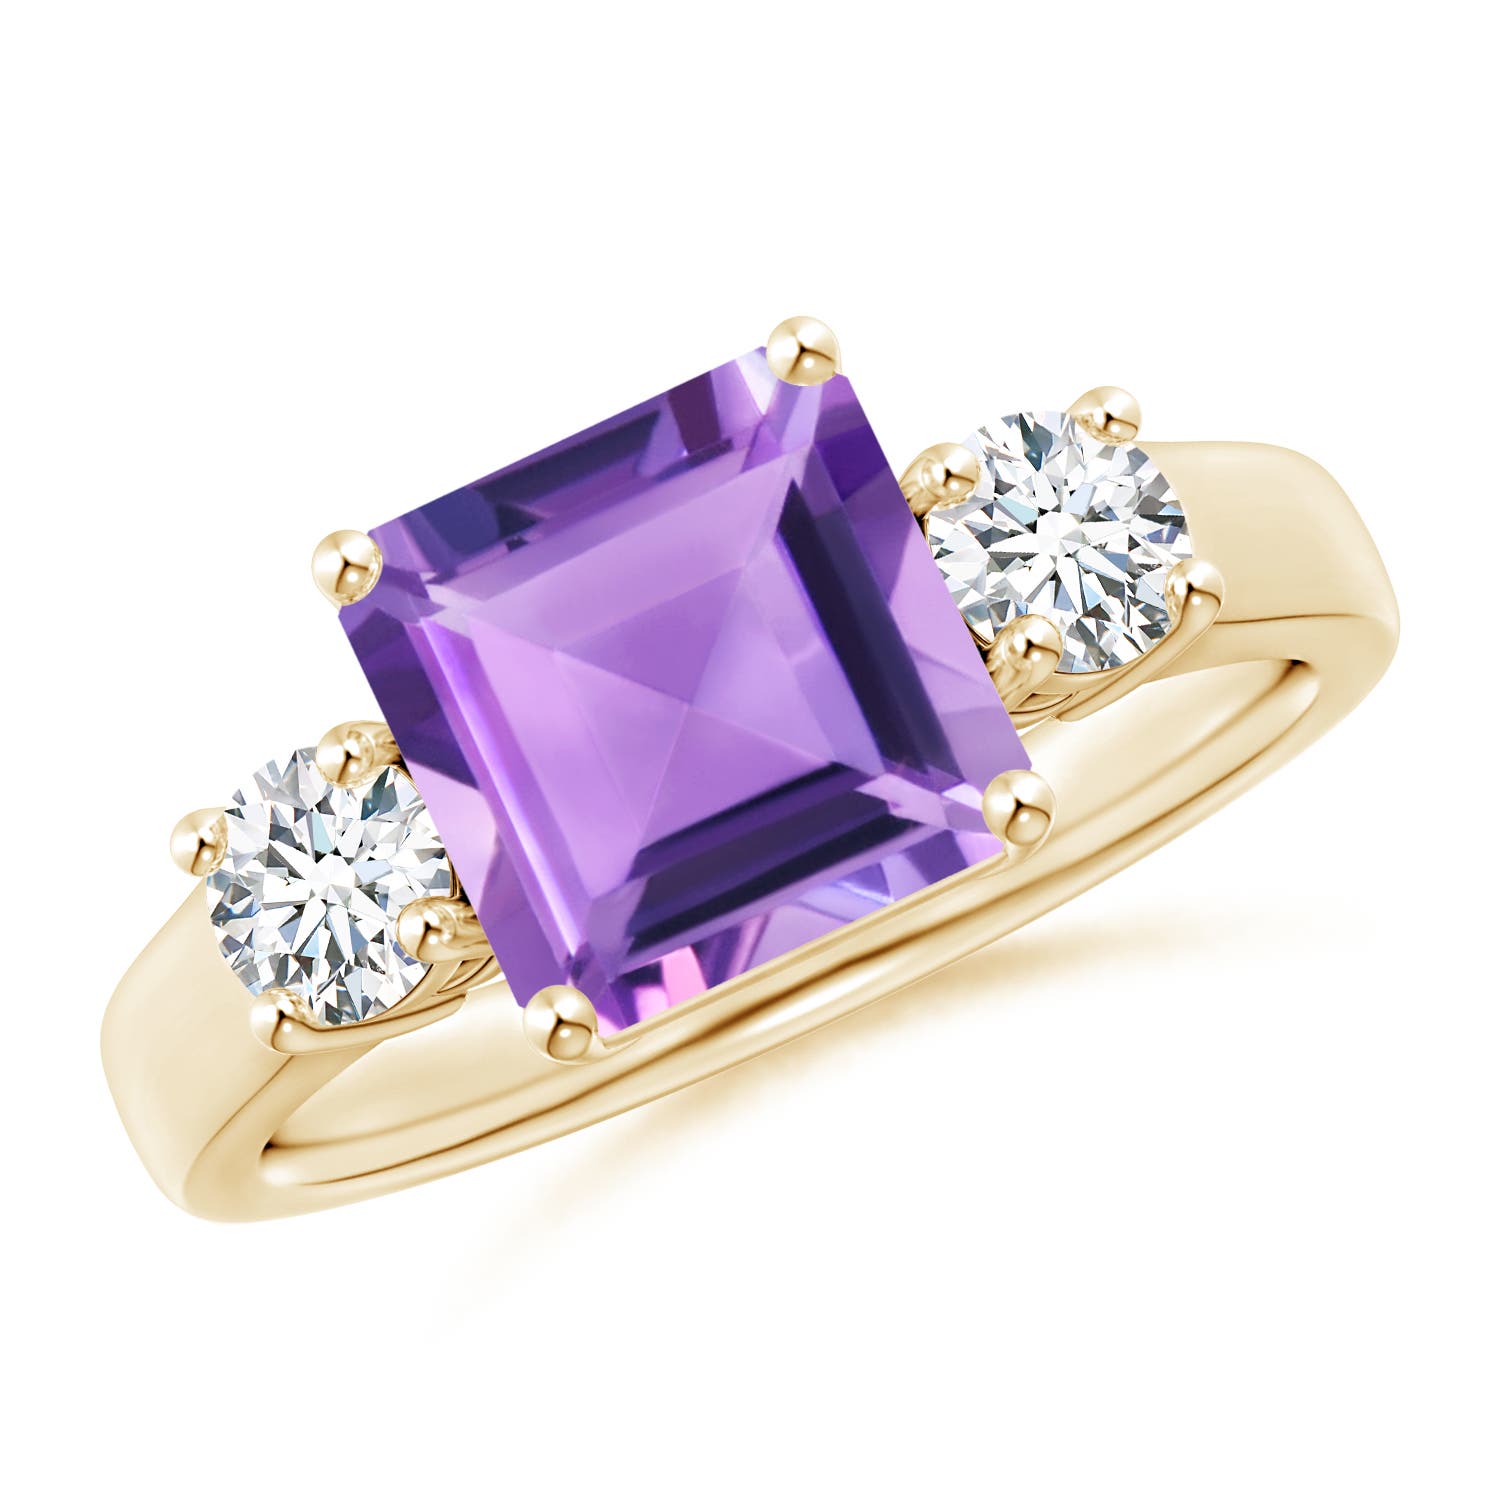 A - Amethyst / 2.46 CT / 14 KT Yellow Gold